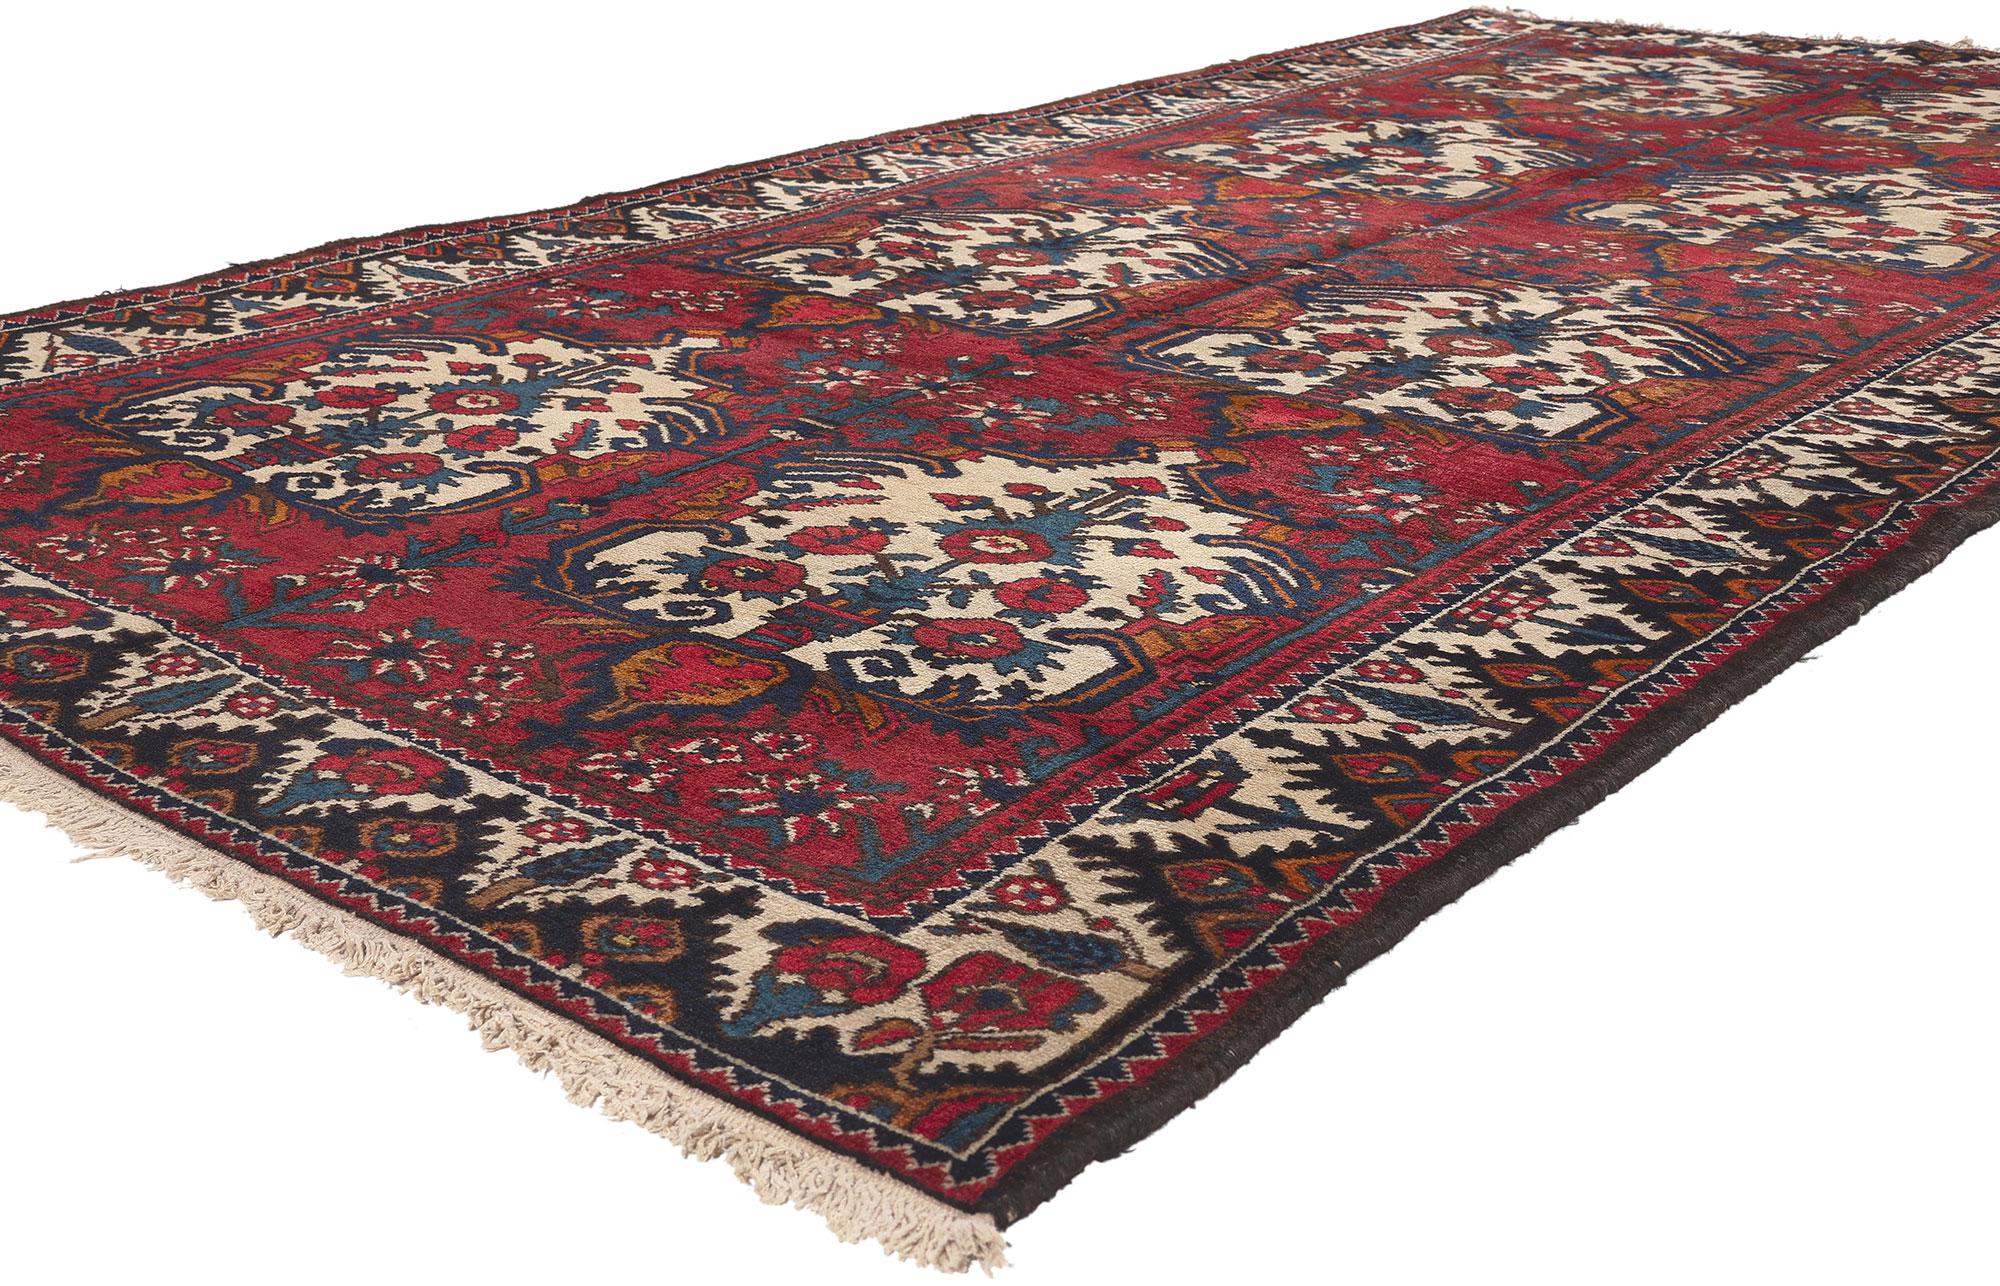 71127 Antique Persian Bakhtiari Rug, 05'03 x 10'05.
Timeless appeal meets patriotic flair in this hand knotted wool antique Persian Bakhtiari rug. The unique garden panel design and sophisticated colors woven into this piece work together creating a